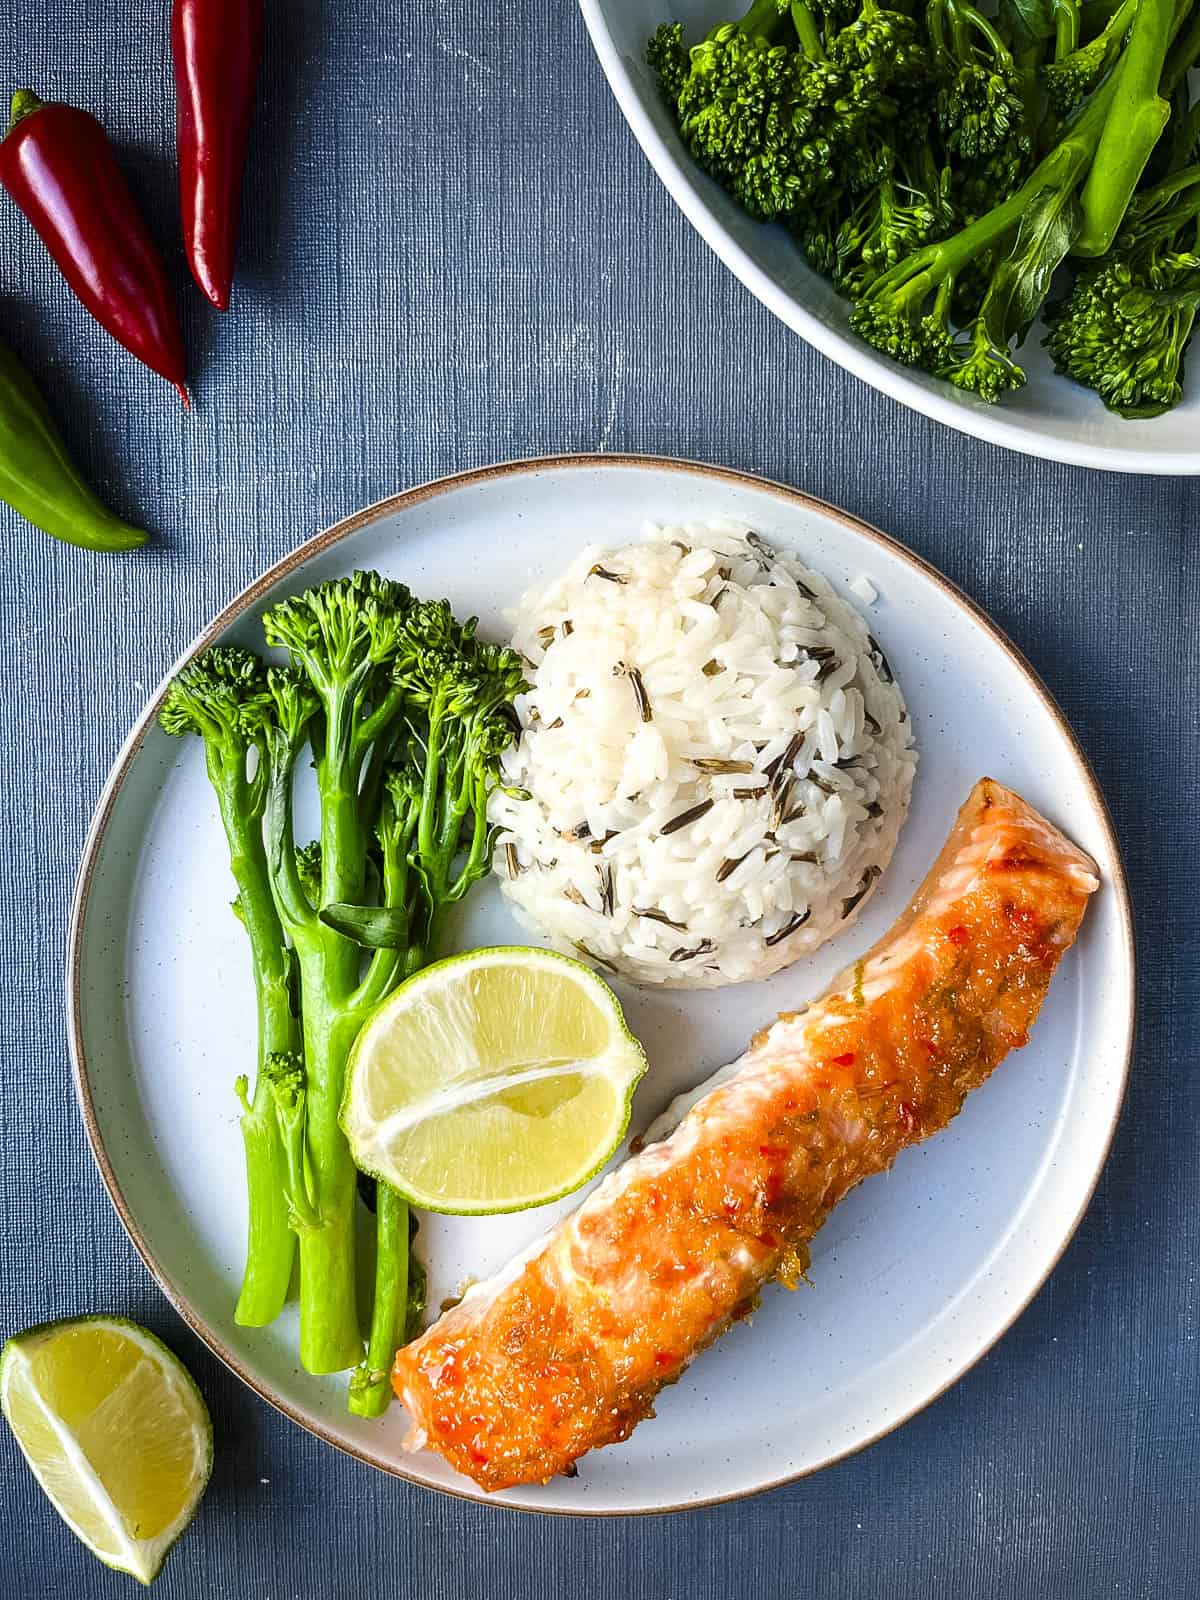 plate with baked salmon fillet, wild rice and tender stem broccoli.